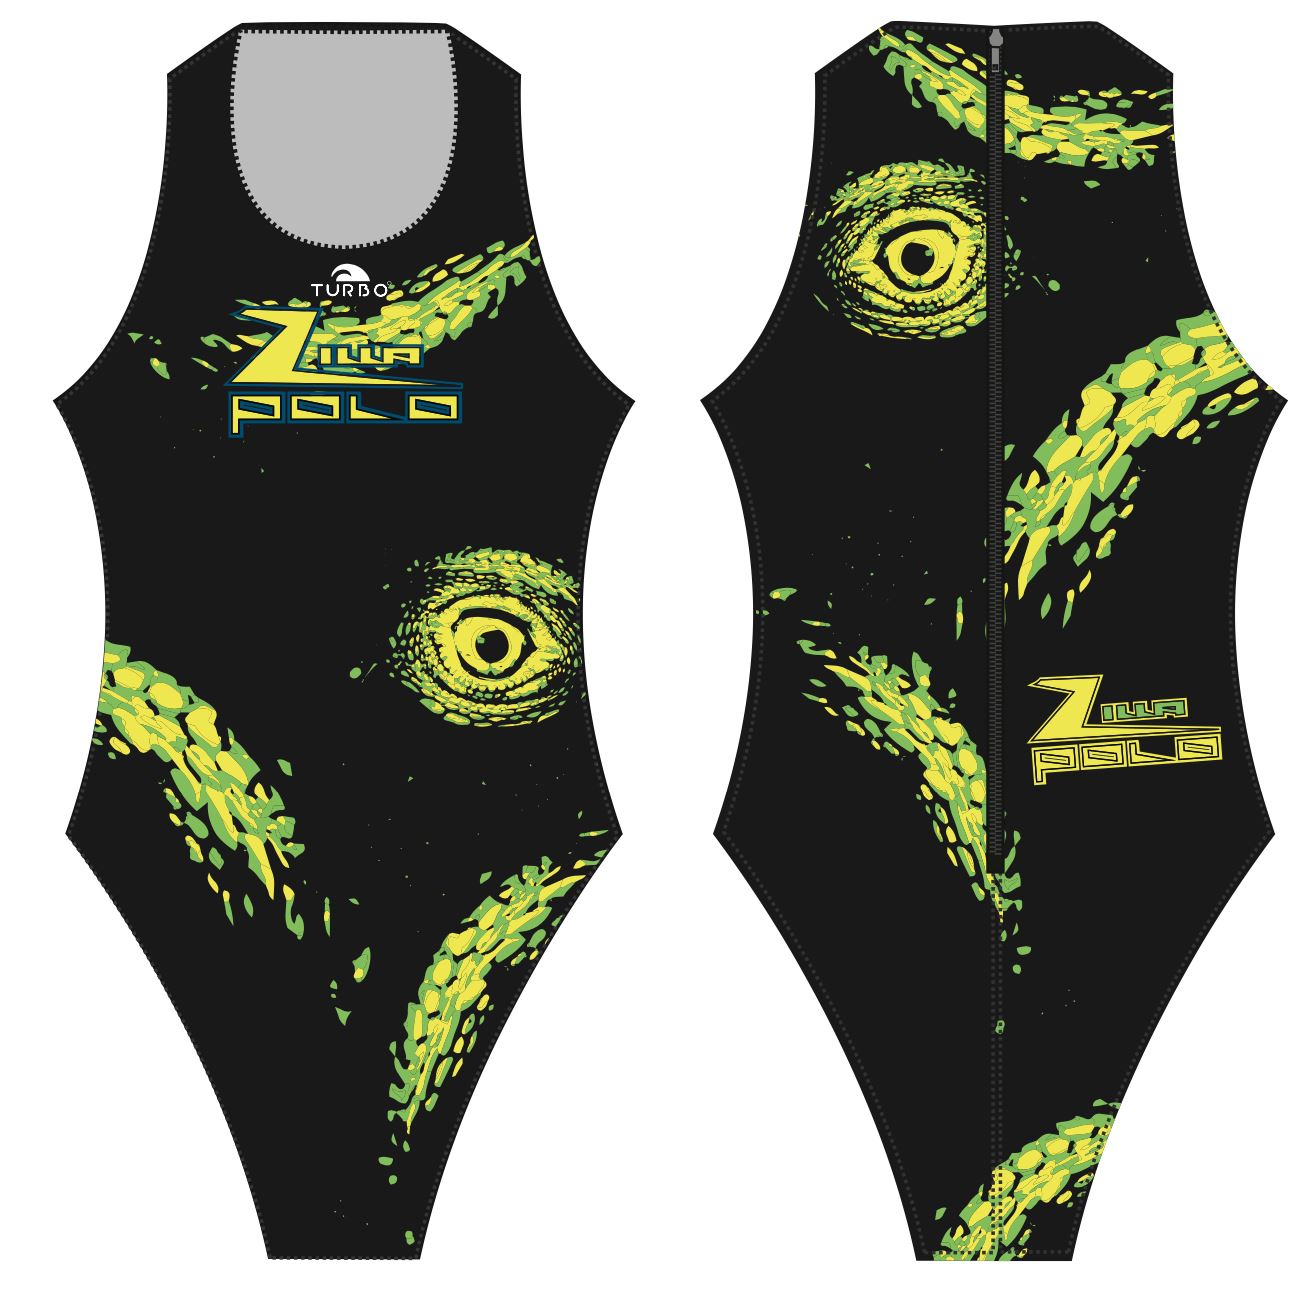 Zilla WPC Team Store - TURBO Womens Euro Plus Water Polo Suit Suits KAP7 International 